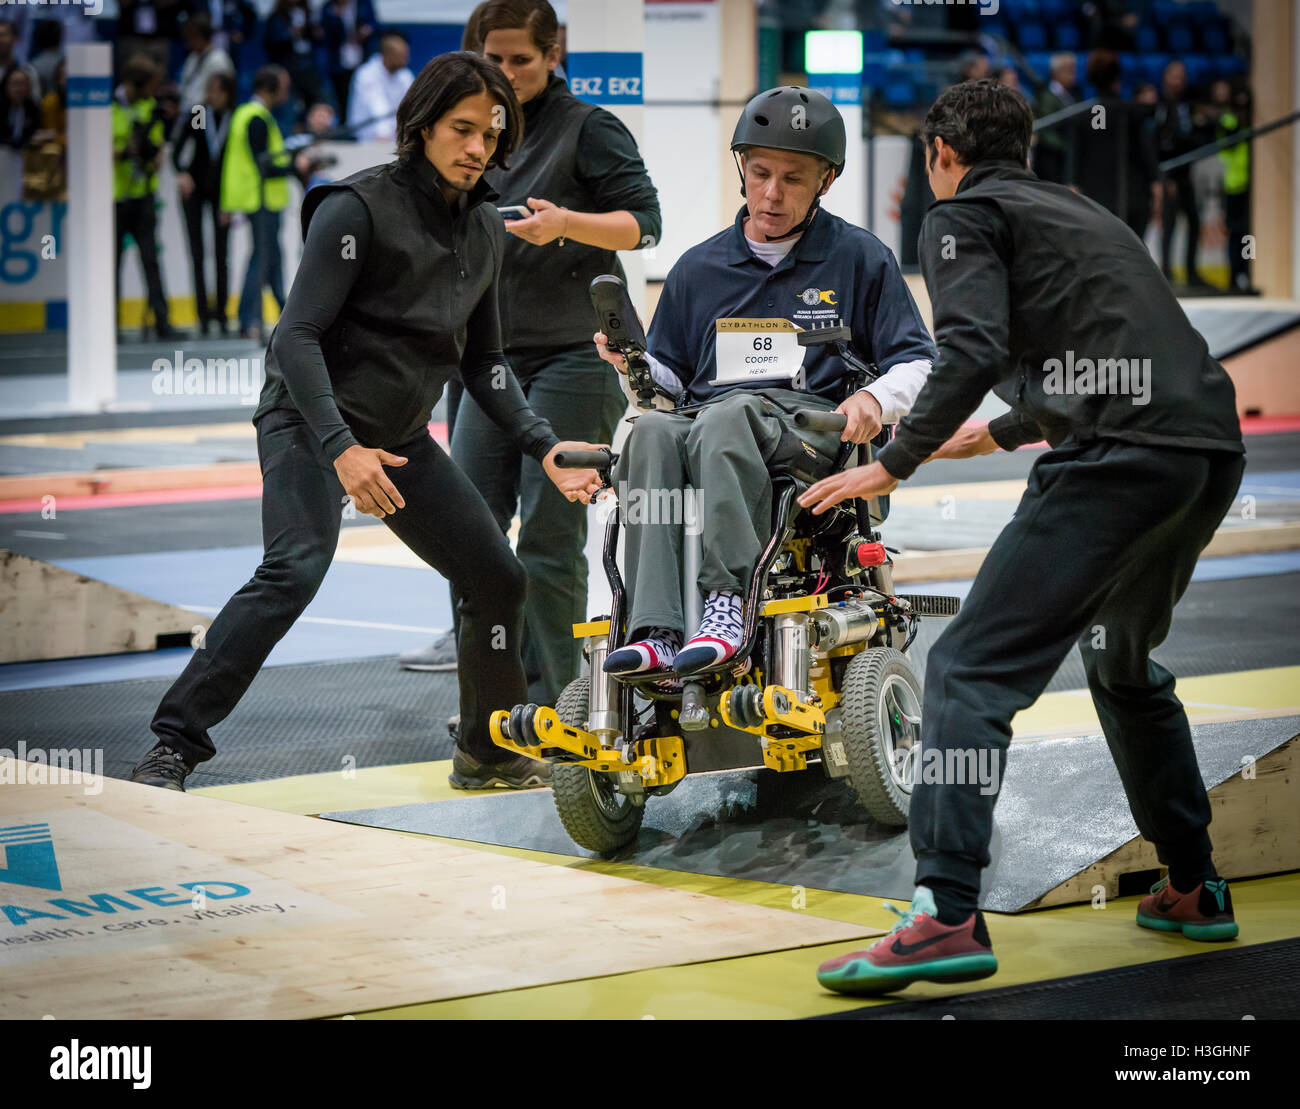 Kloten, Switzerland. 8th Oct, 2016. Rory A. Cooper (USA) in the wheelchair obstacle course at Cybathlon, the first championship for racing pilots with disabilities using bionic devices at the Swiss Arena in Kloten (Zurich), Switzerland. Organized by the Swiss Federal Institute of Technology (ETH) in Zurich, Cybathlon brings together interdisciplinary teams of bio-engineers, scientists and athletes with physical disabilities to compete in solving everyday tasks and to demonstrate how technology enables them to overcome physical limitations of their body. Credit:  Erik Tham/Alamy Live News Stock Photo